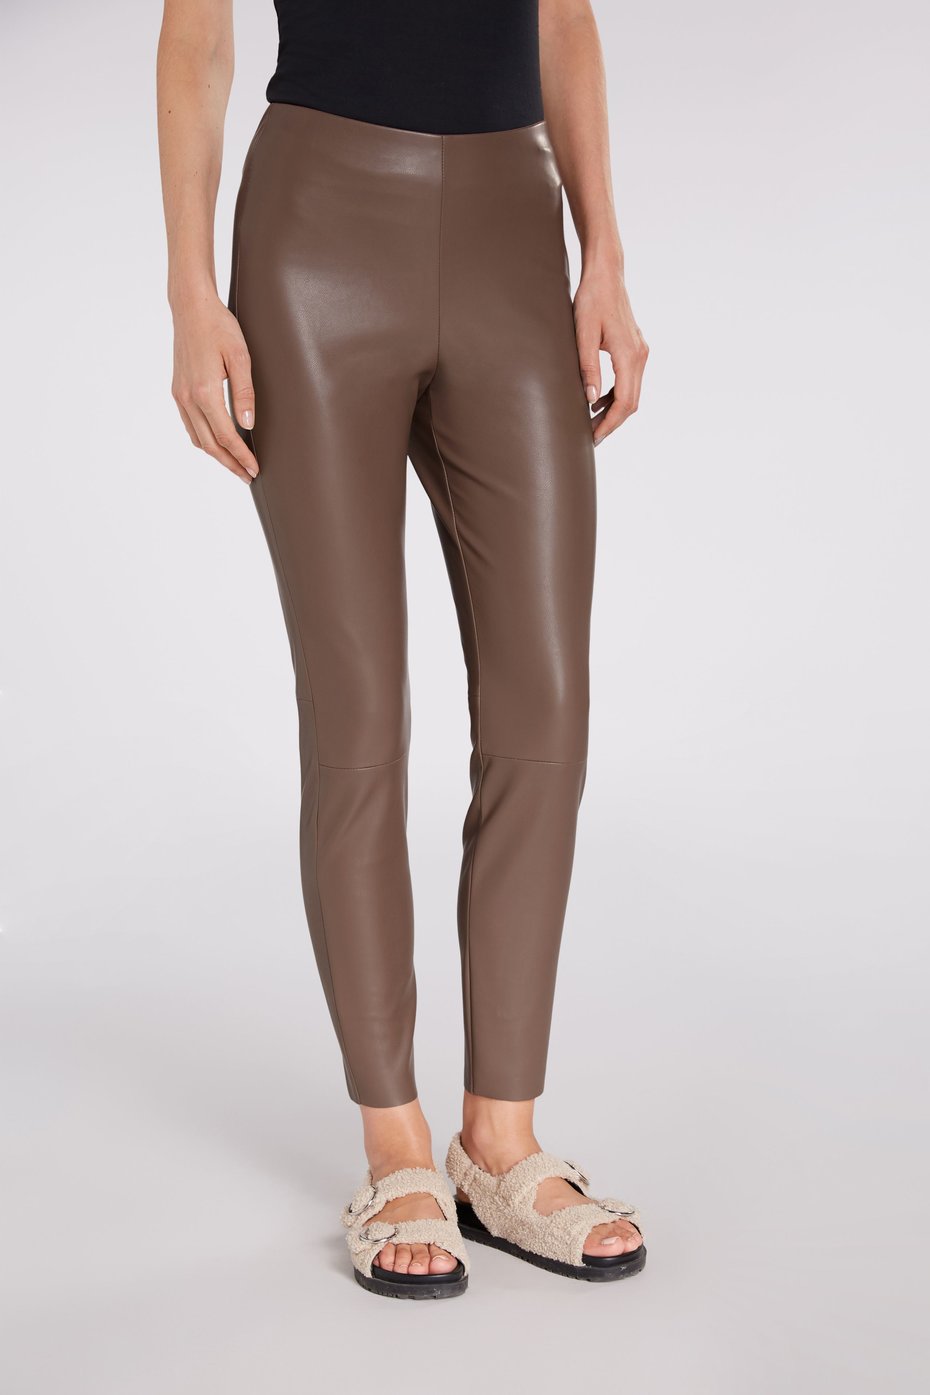 OUI FAUX LEATHER JEGGING IN TAUPE